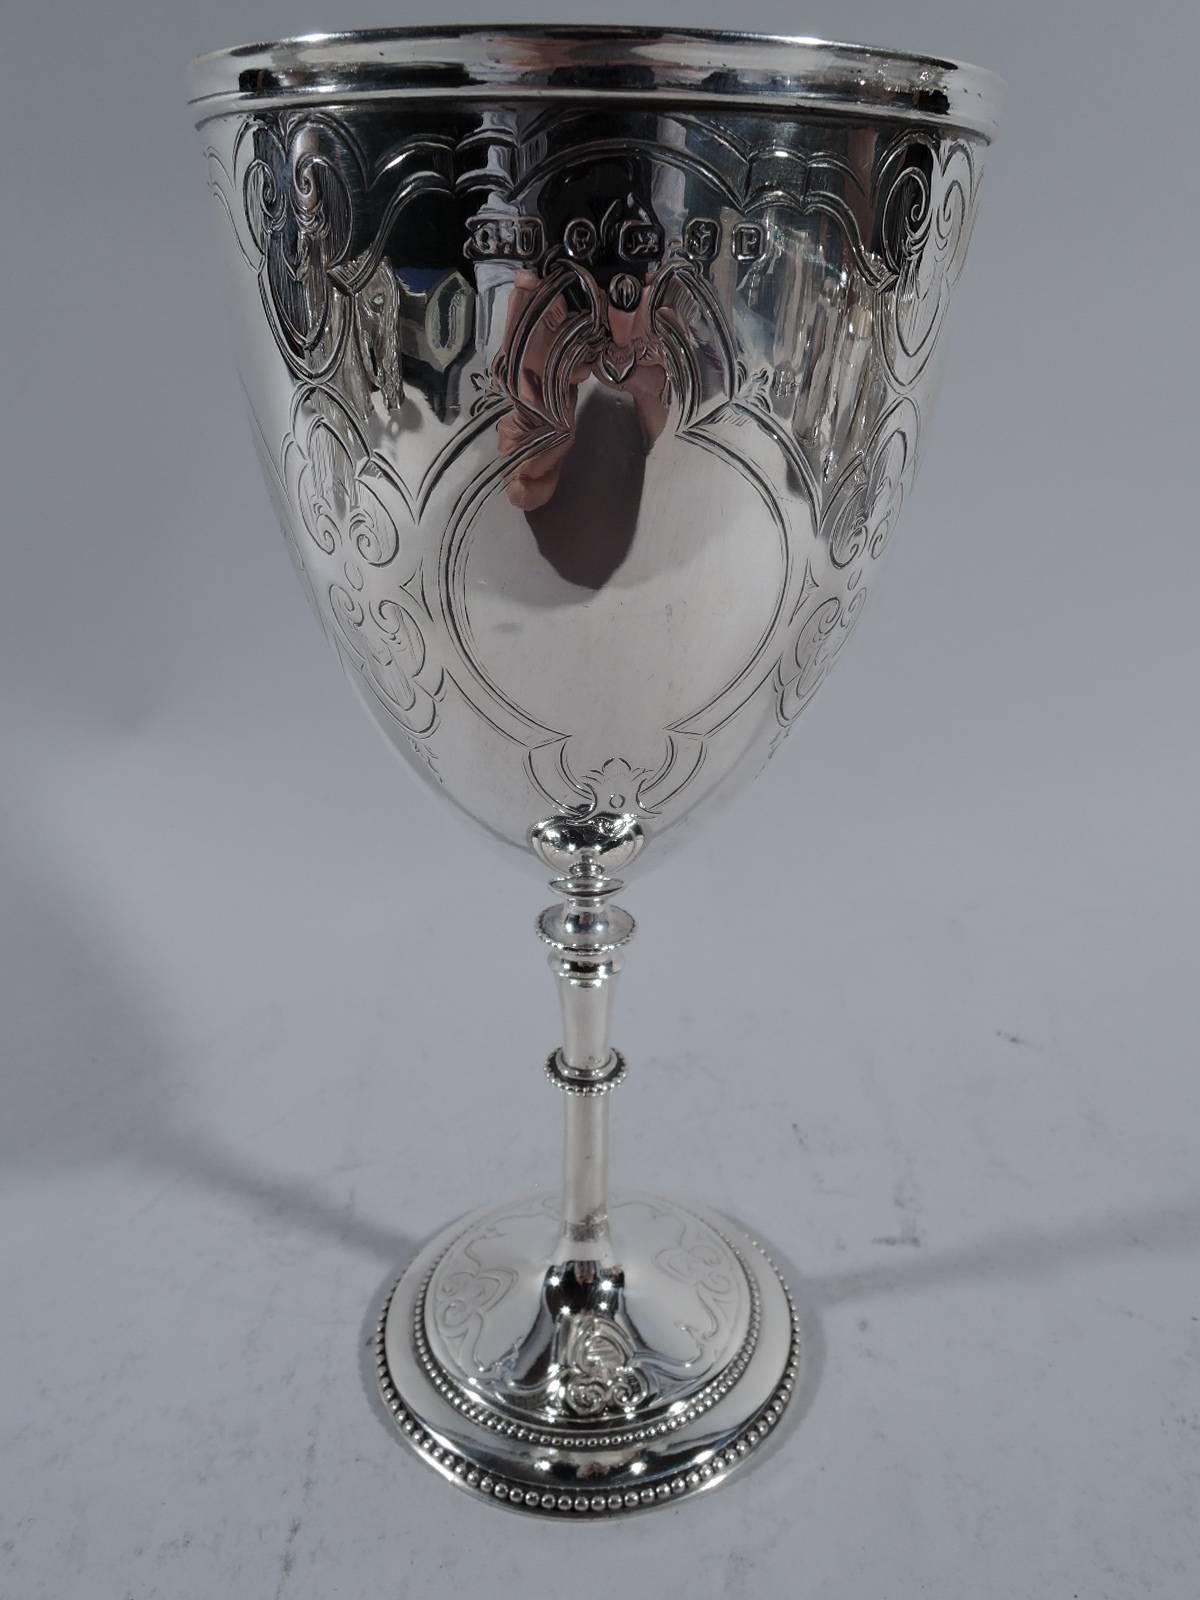 Victorian sterling silver goblet. Made by George Unite in Birmingham in 1864. Ovoid bowl with slender and knopped stem and stepped foot. Engraved ecclesiastical ornament: strapwork quatrefoils inset with crosses alternating with joined fleurs de